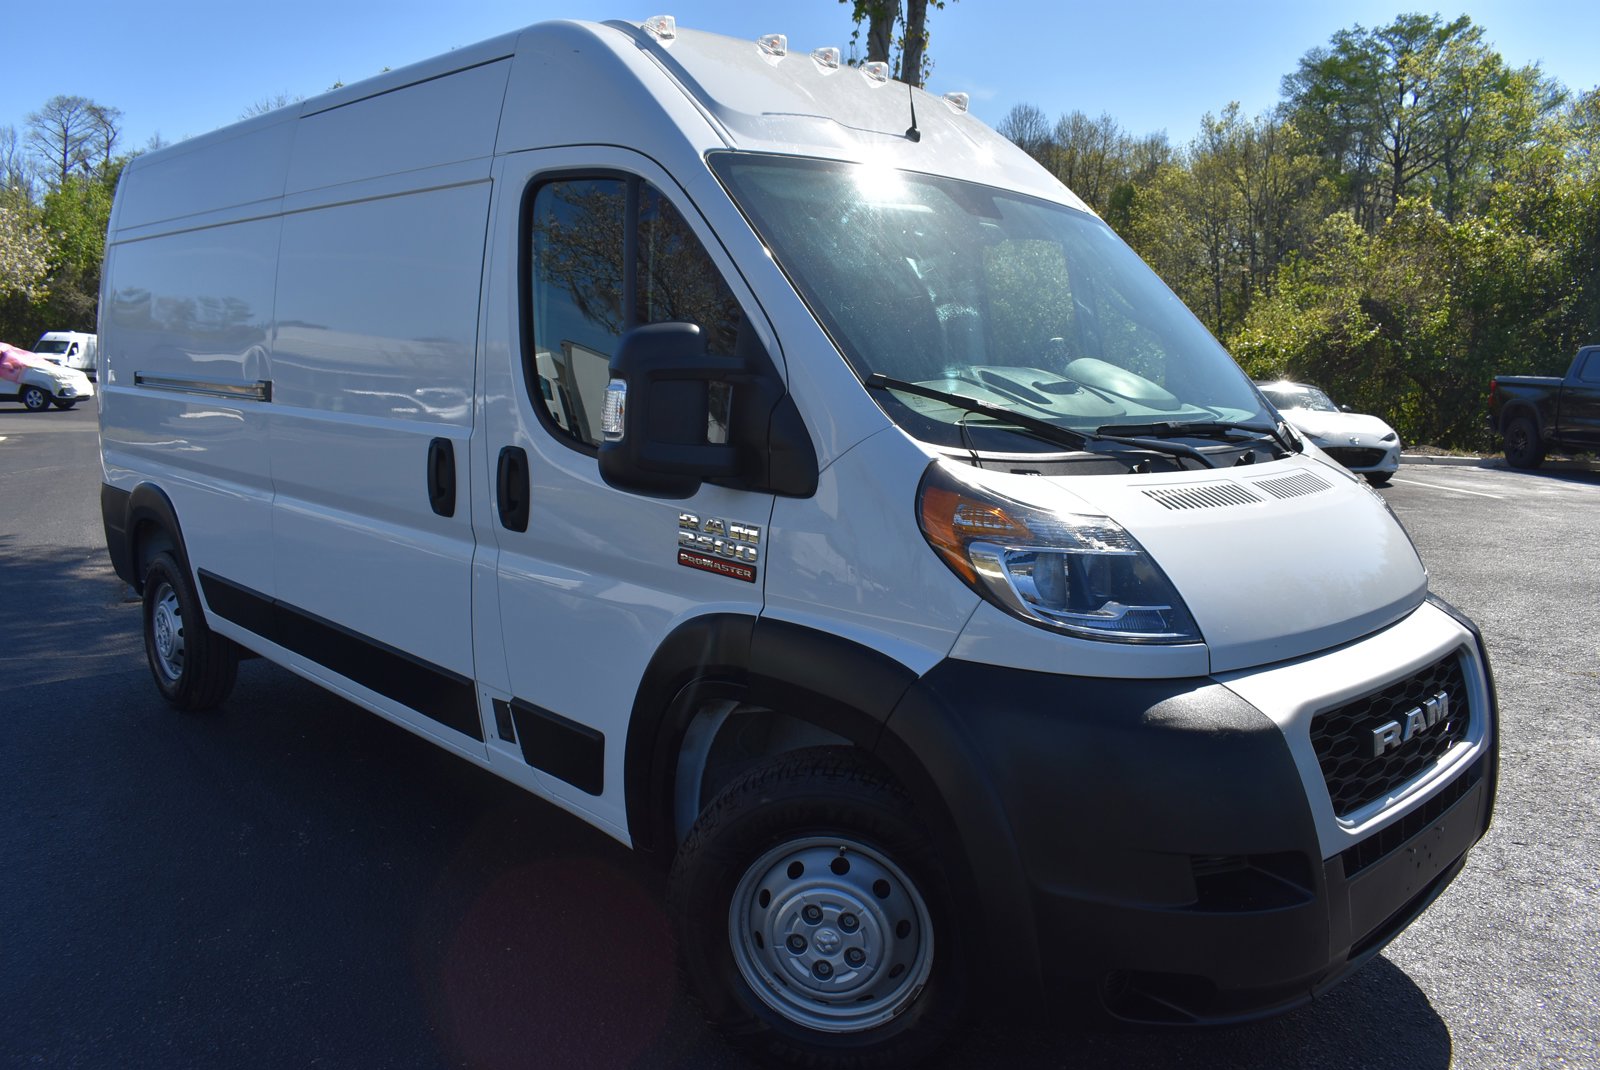 Pre-Owned 2021 Ram ProMaster Cargo Van FWD 2500 High Roof 159 WB in Buford  #P89751 | Mall of Georgia MINI